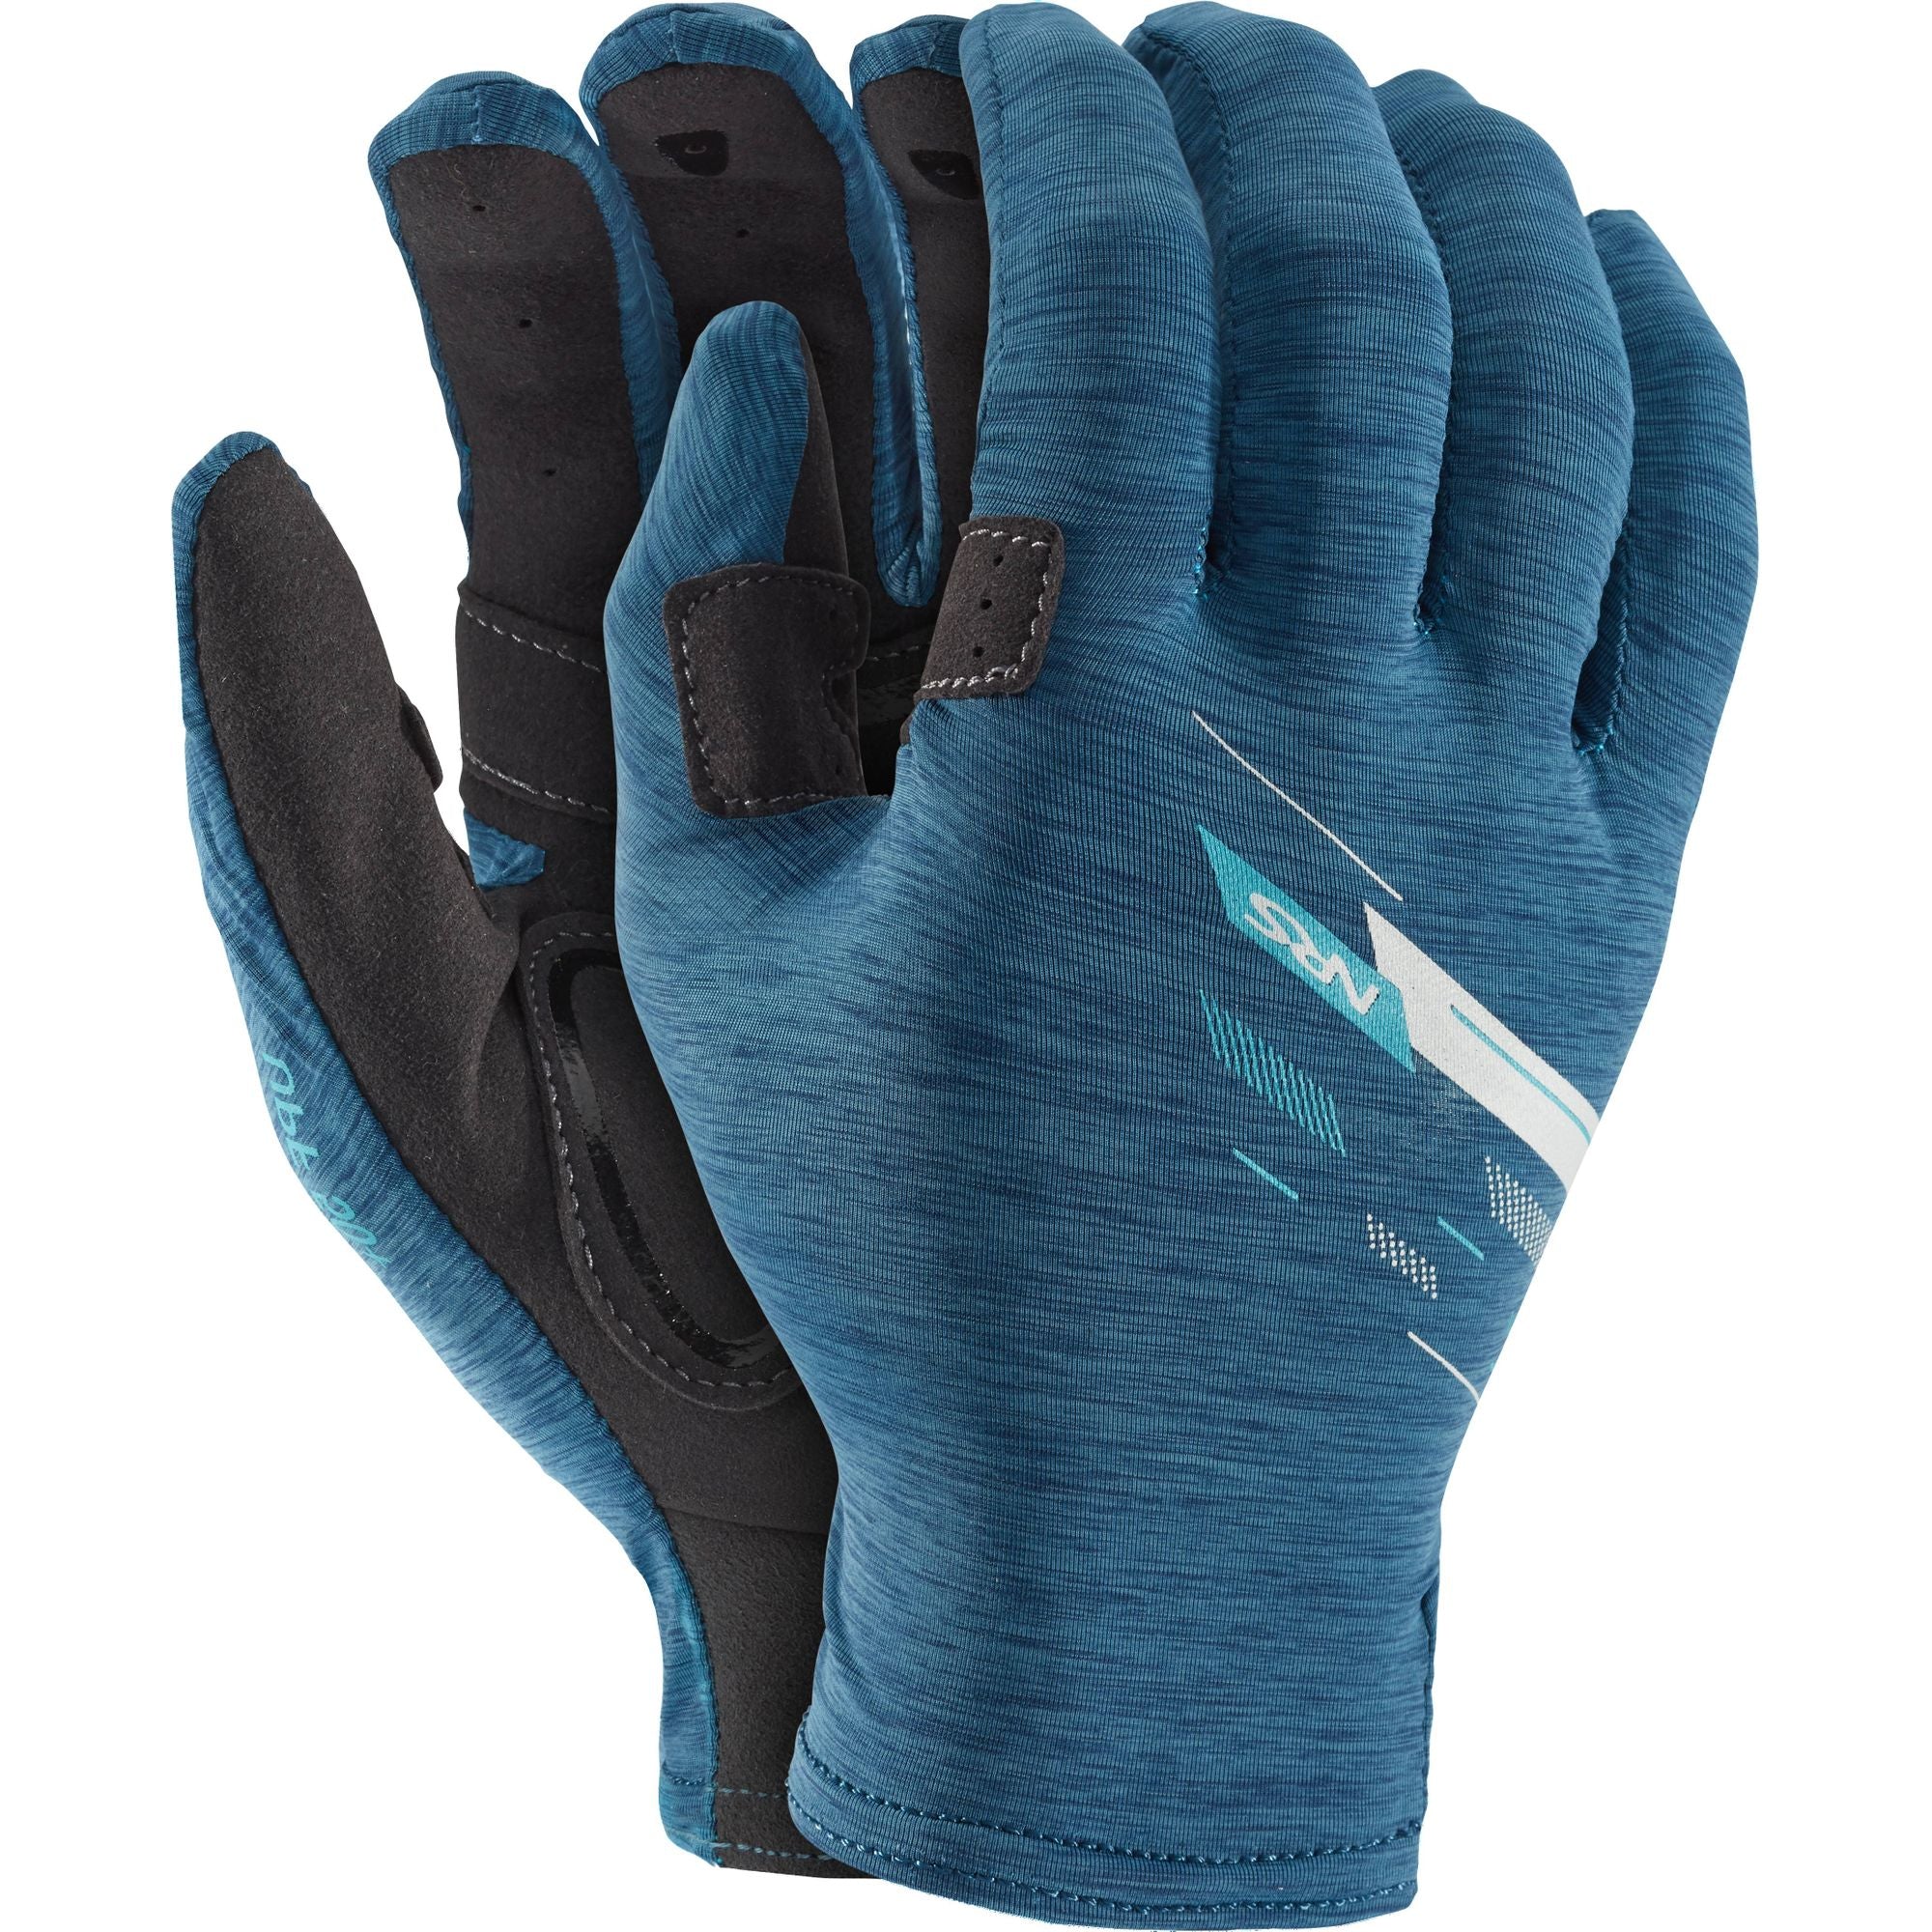 NRS - Cove Gloves